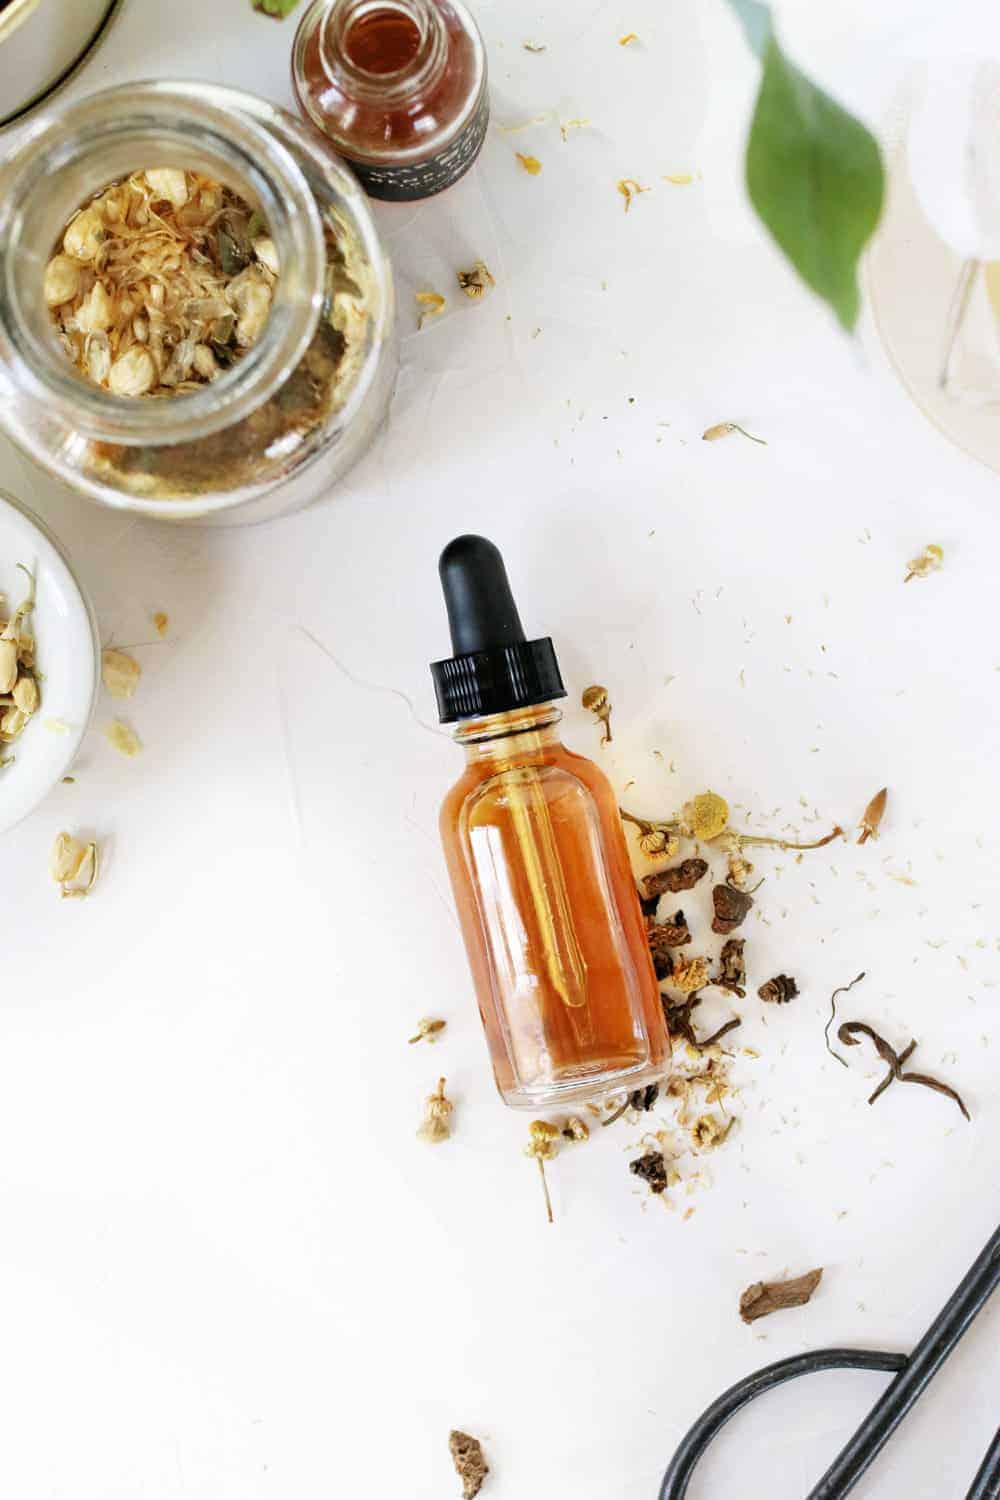 De-Stress With This Relaxing Herbal CBD Tincture